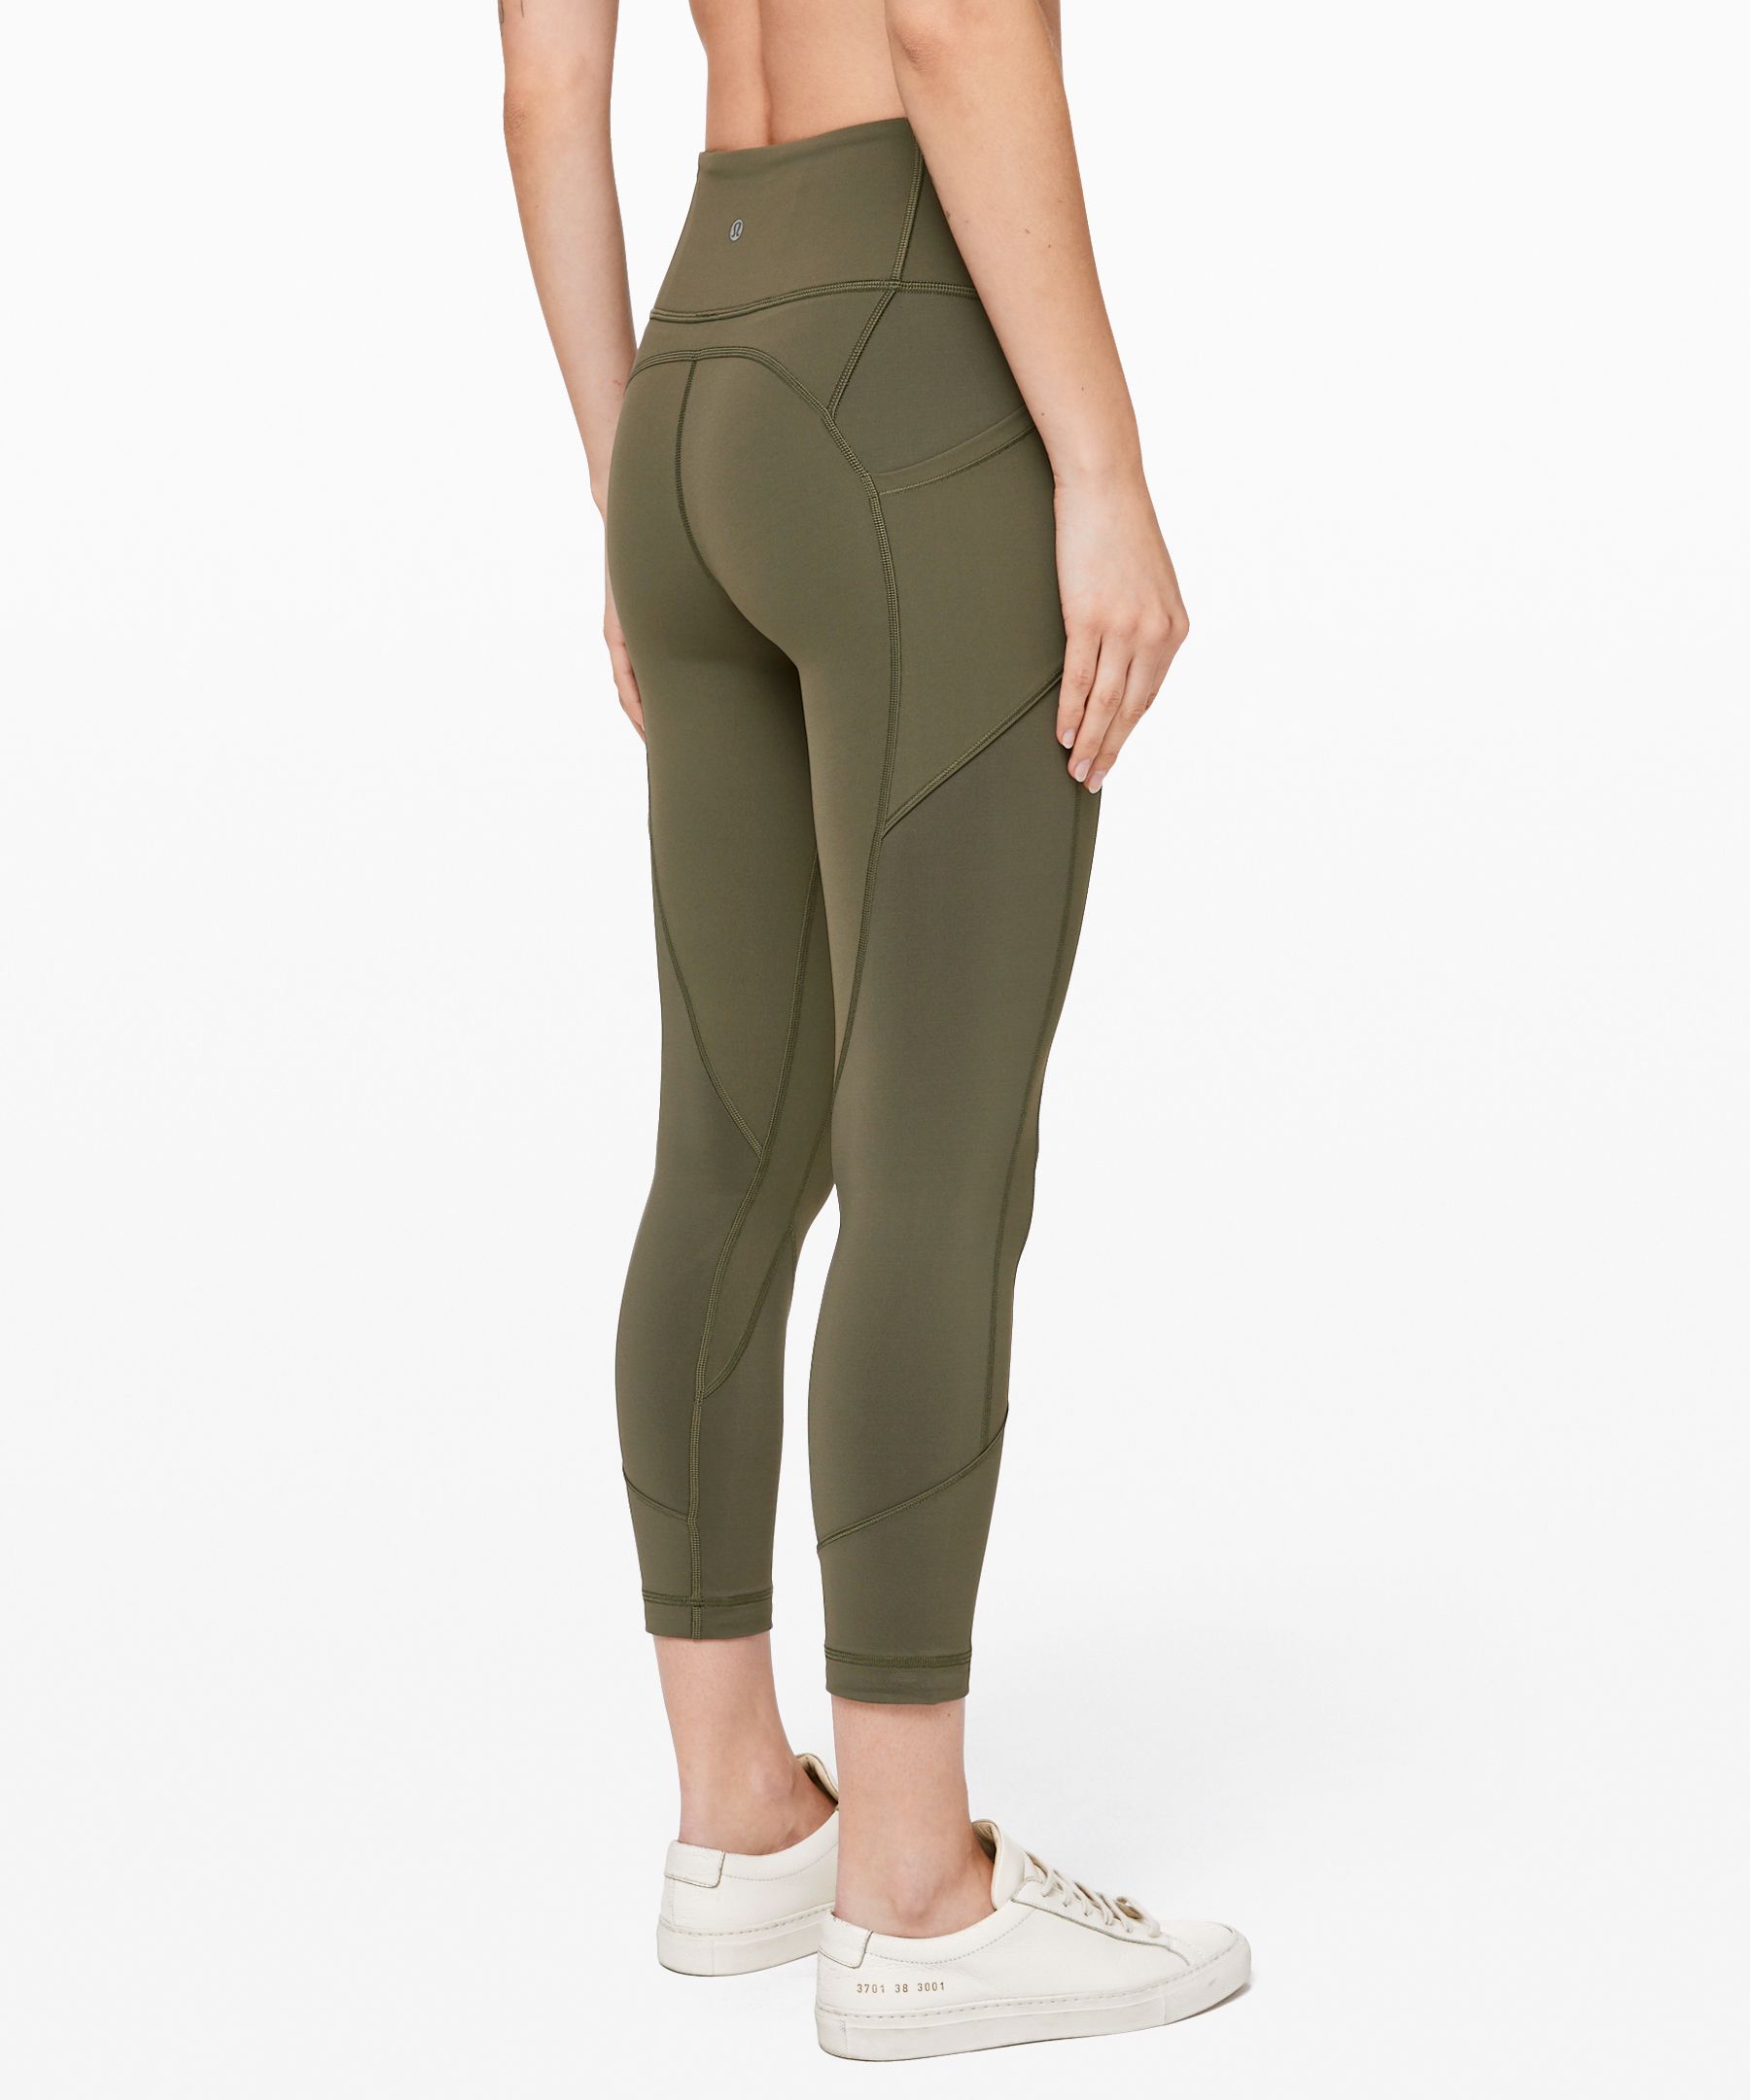 Lululemon All The Right Places Crop 23isback